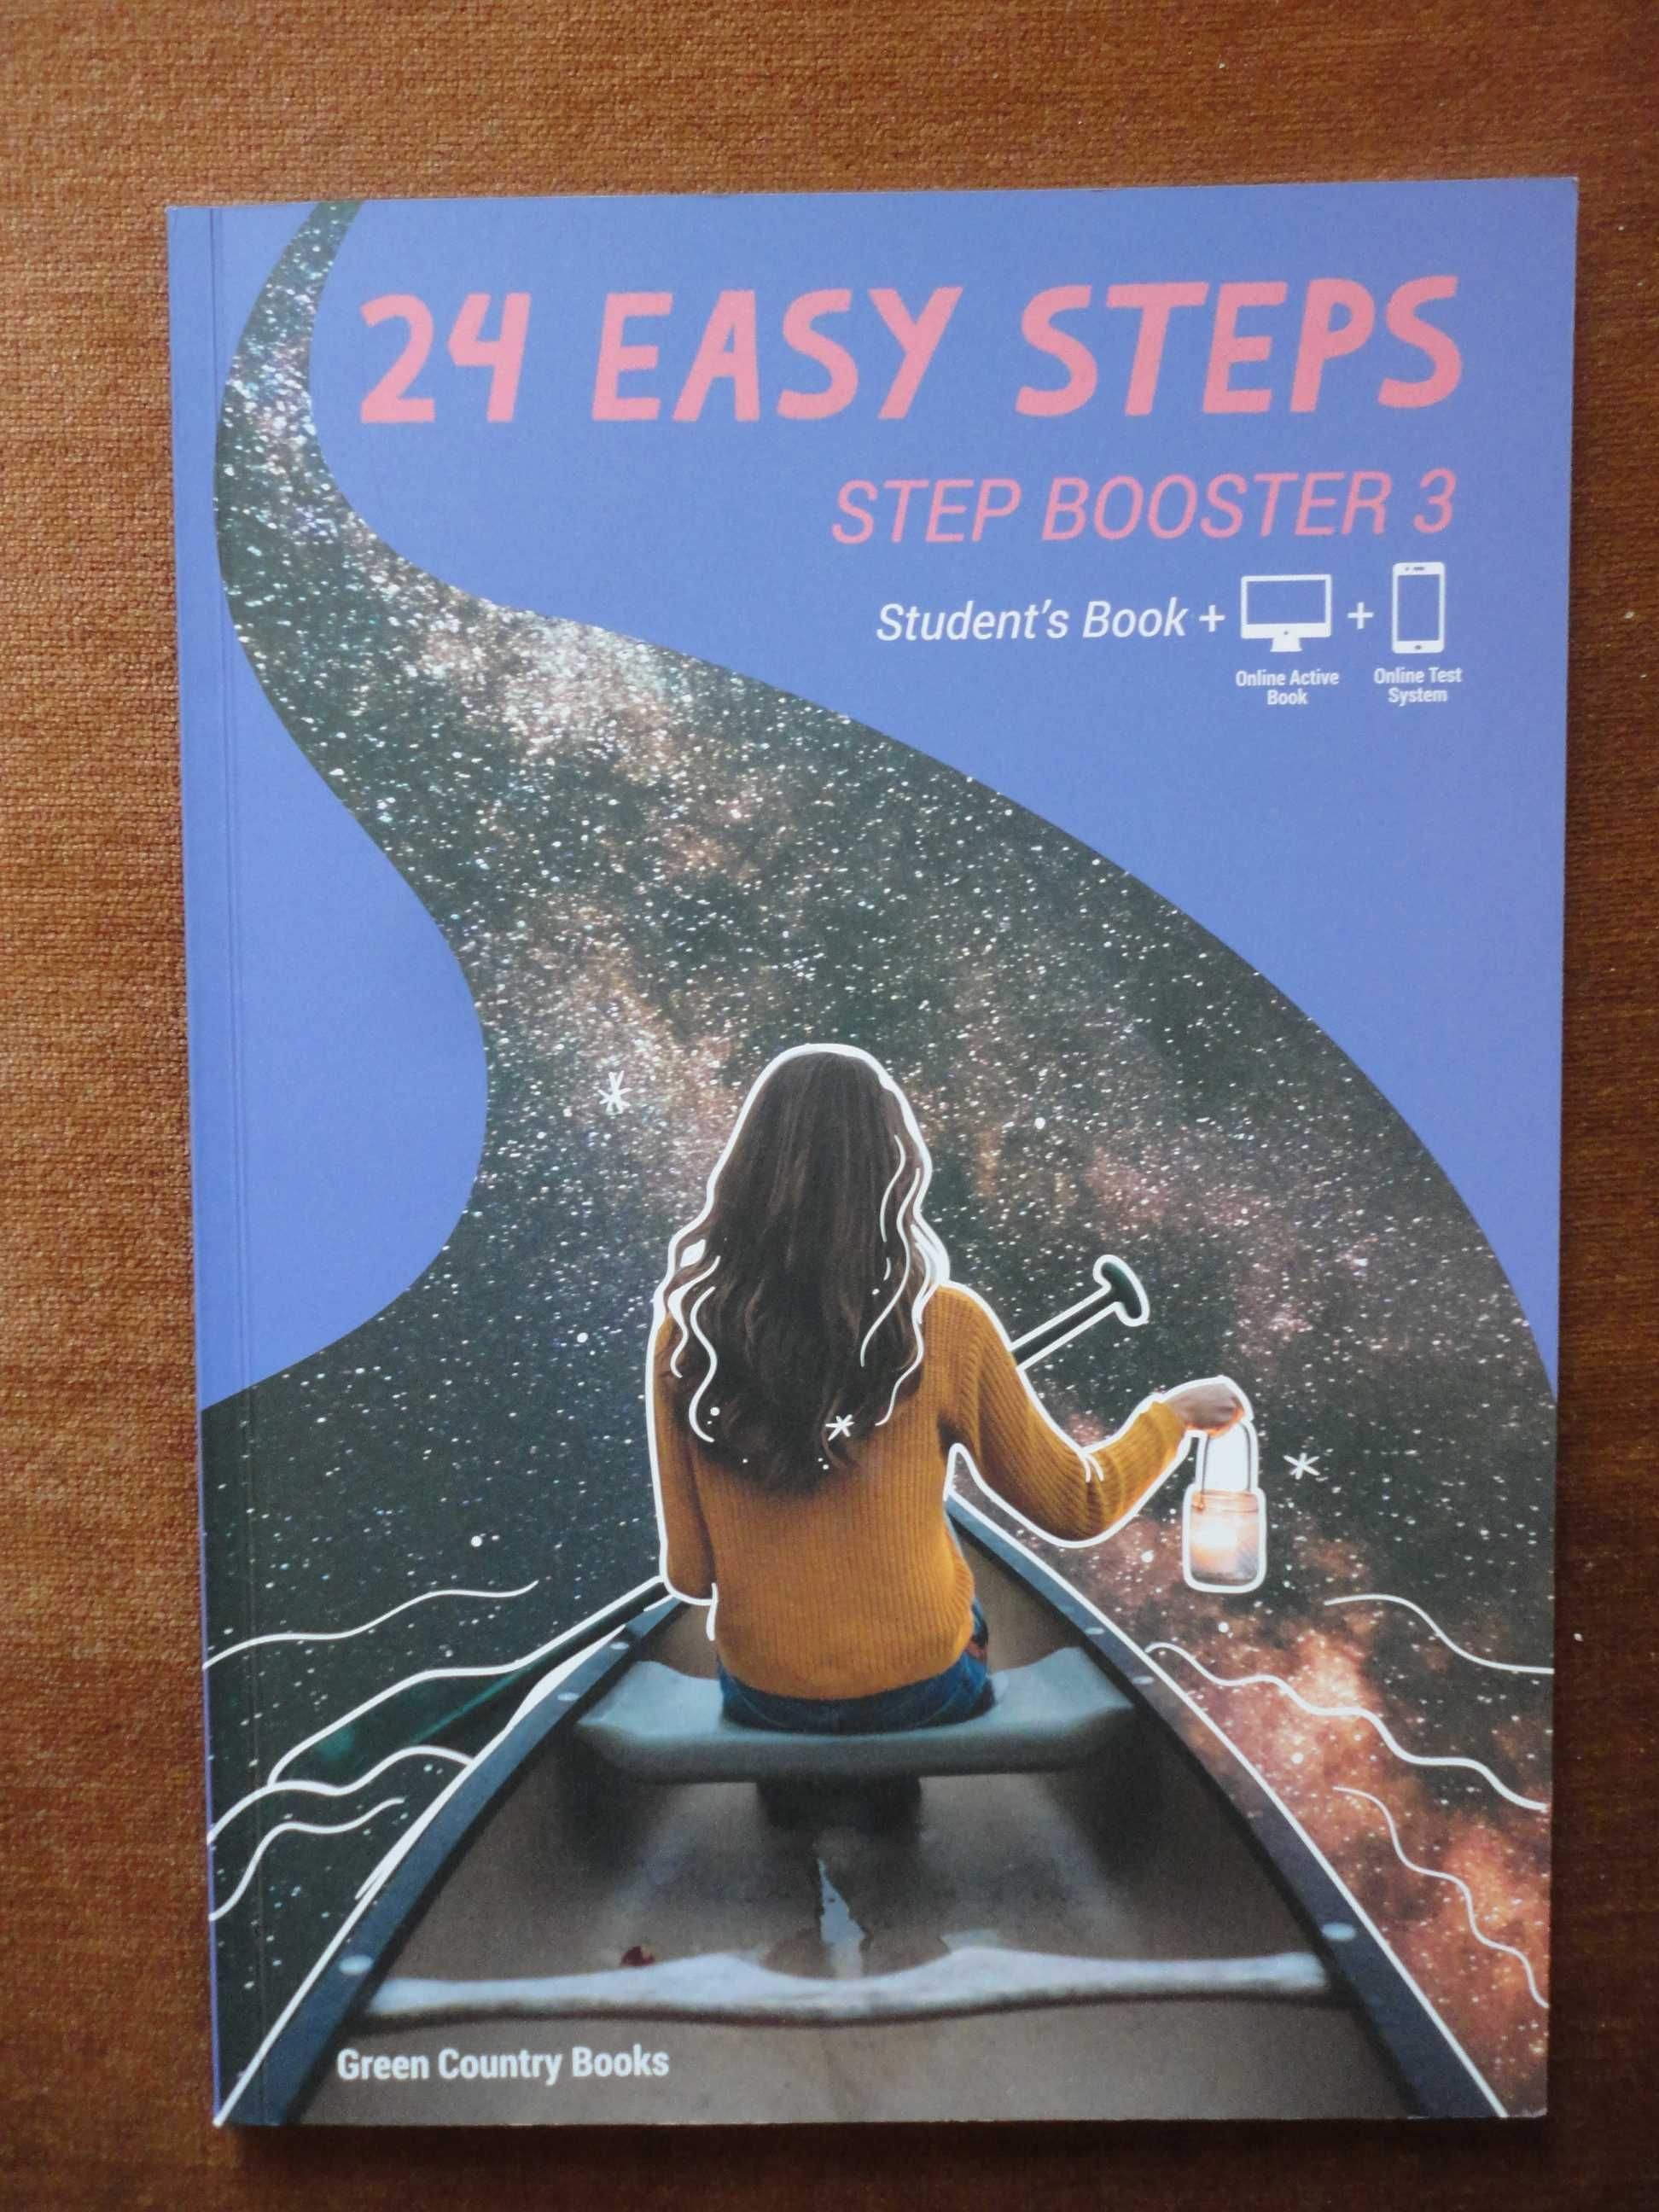 24 EASY STEPS Step Booster 3 Student's book